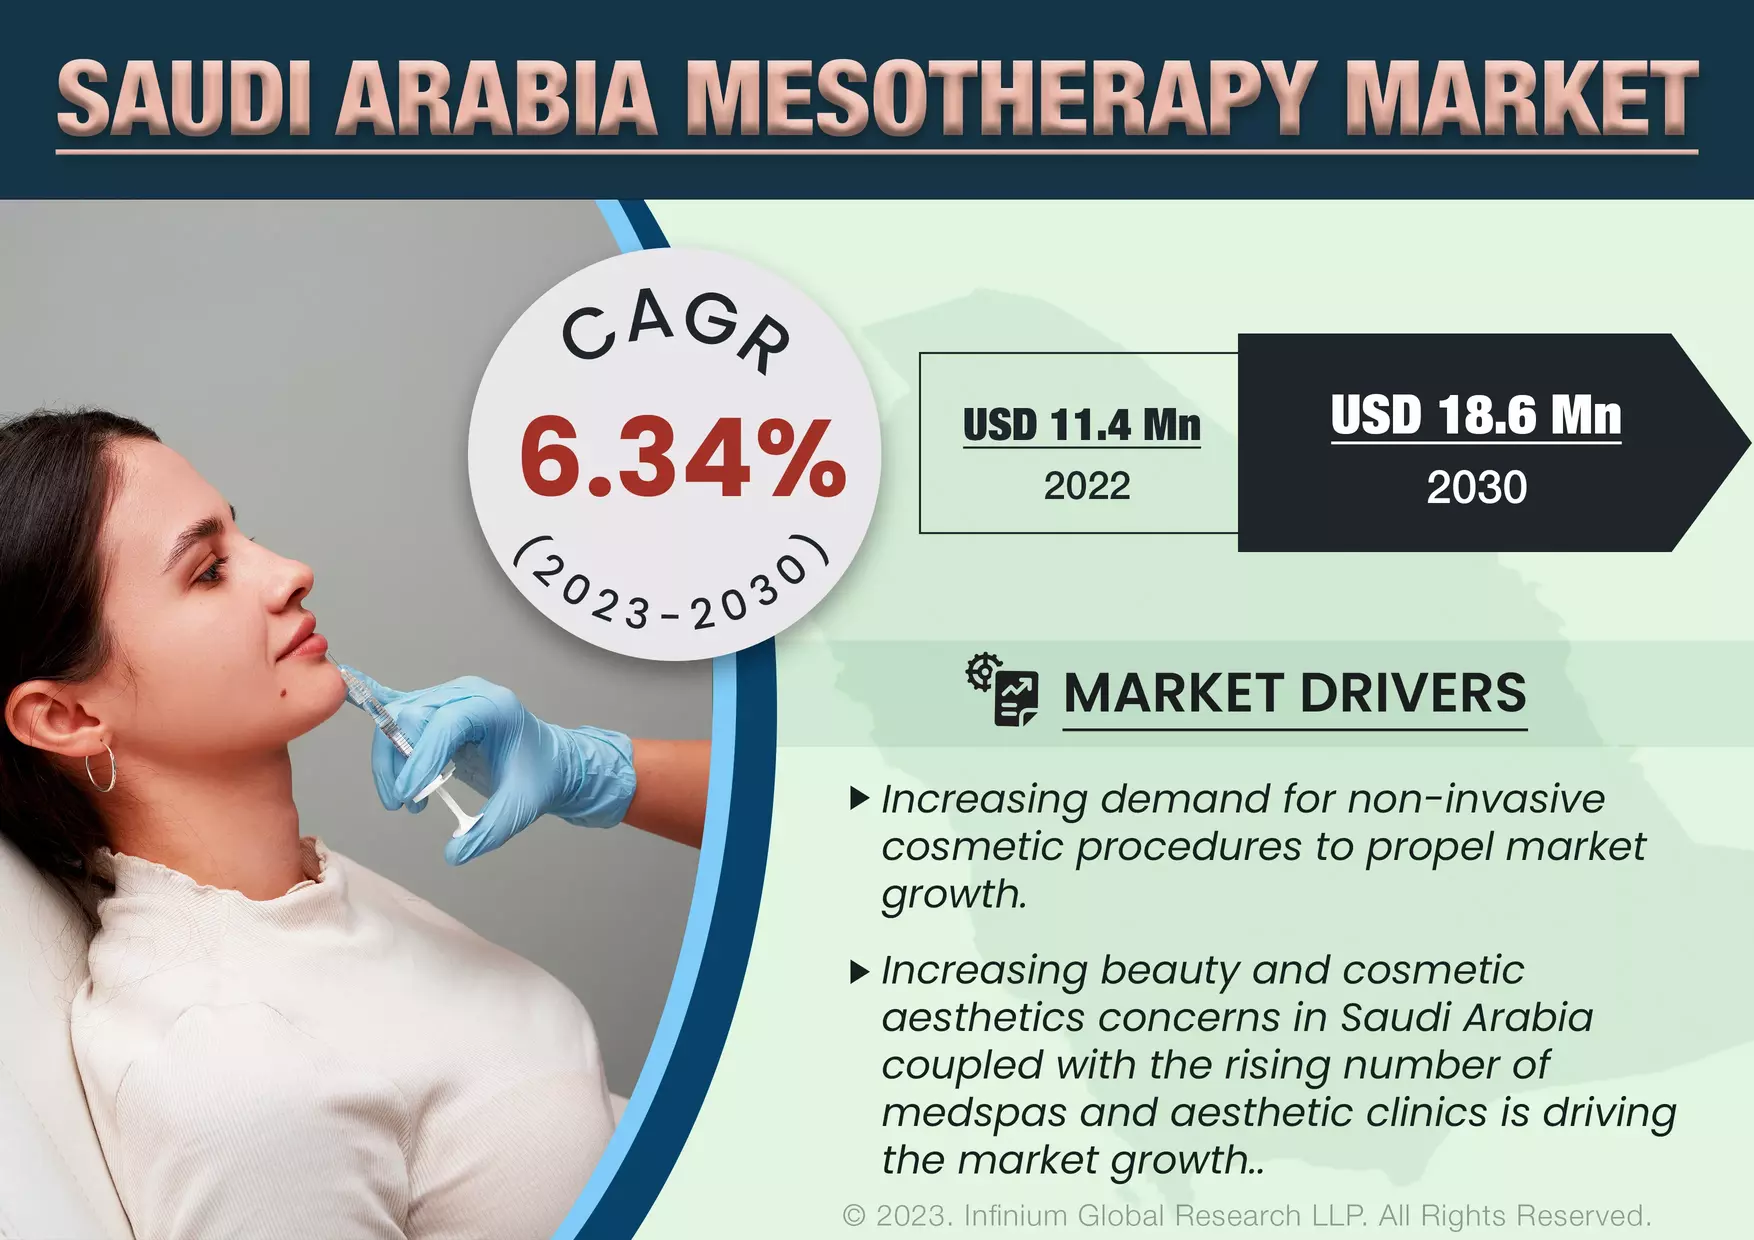 Saudi Arabia Mesotherapy Market was Valued at USD 11.4 Million in 2022 and is Expected to Reach USD 18.6 Million by 2030 and Grow at a CAGR of 6.34% Over the Forecast Period.